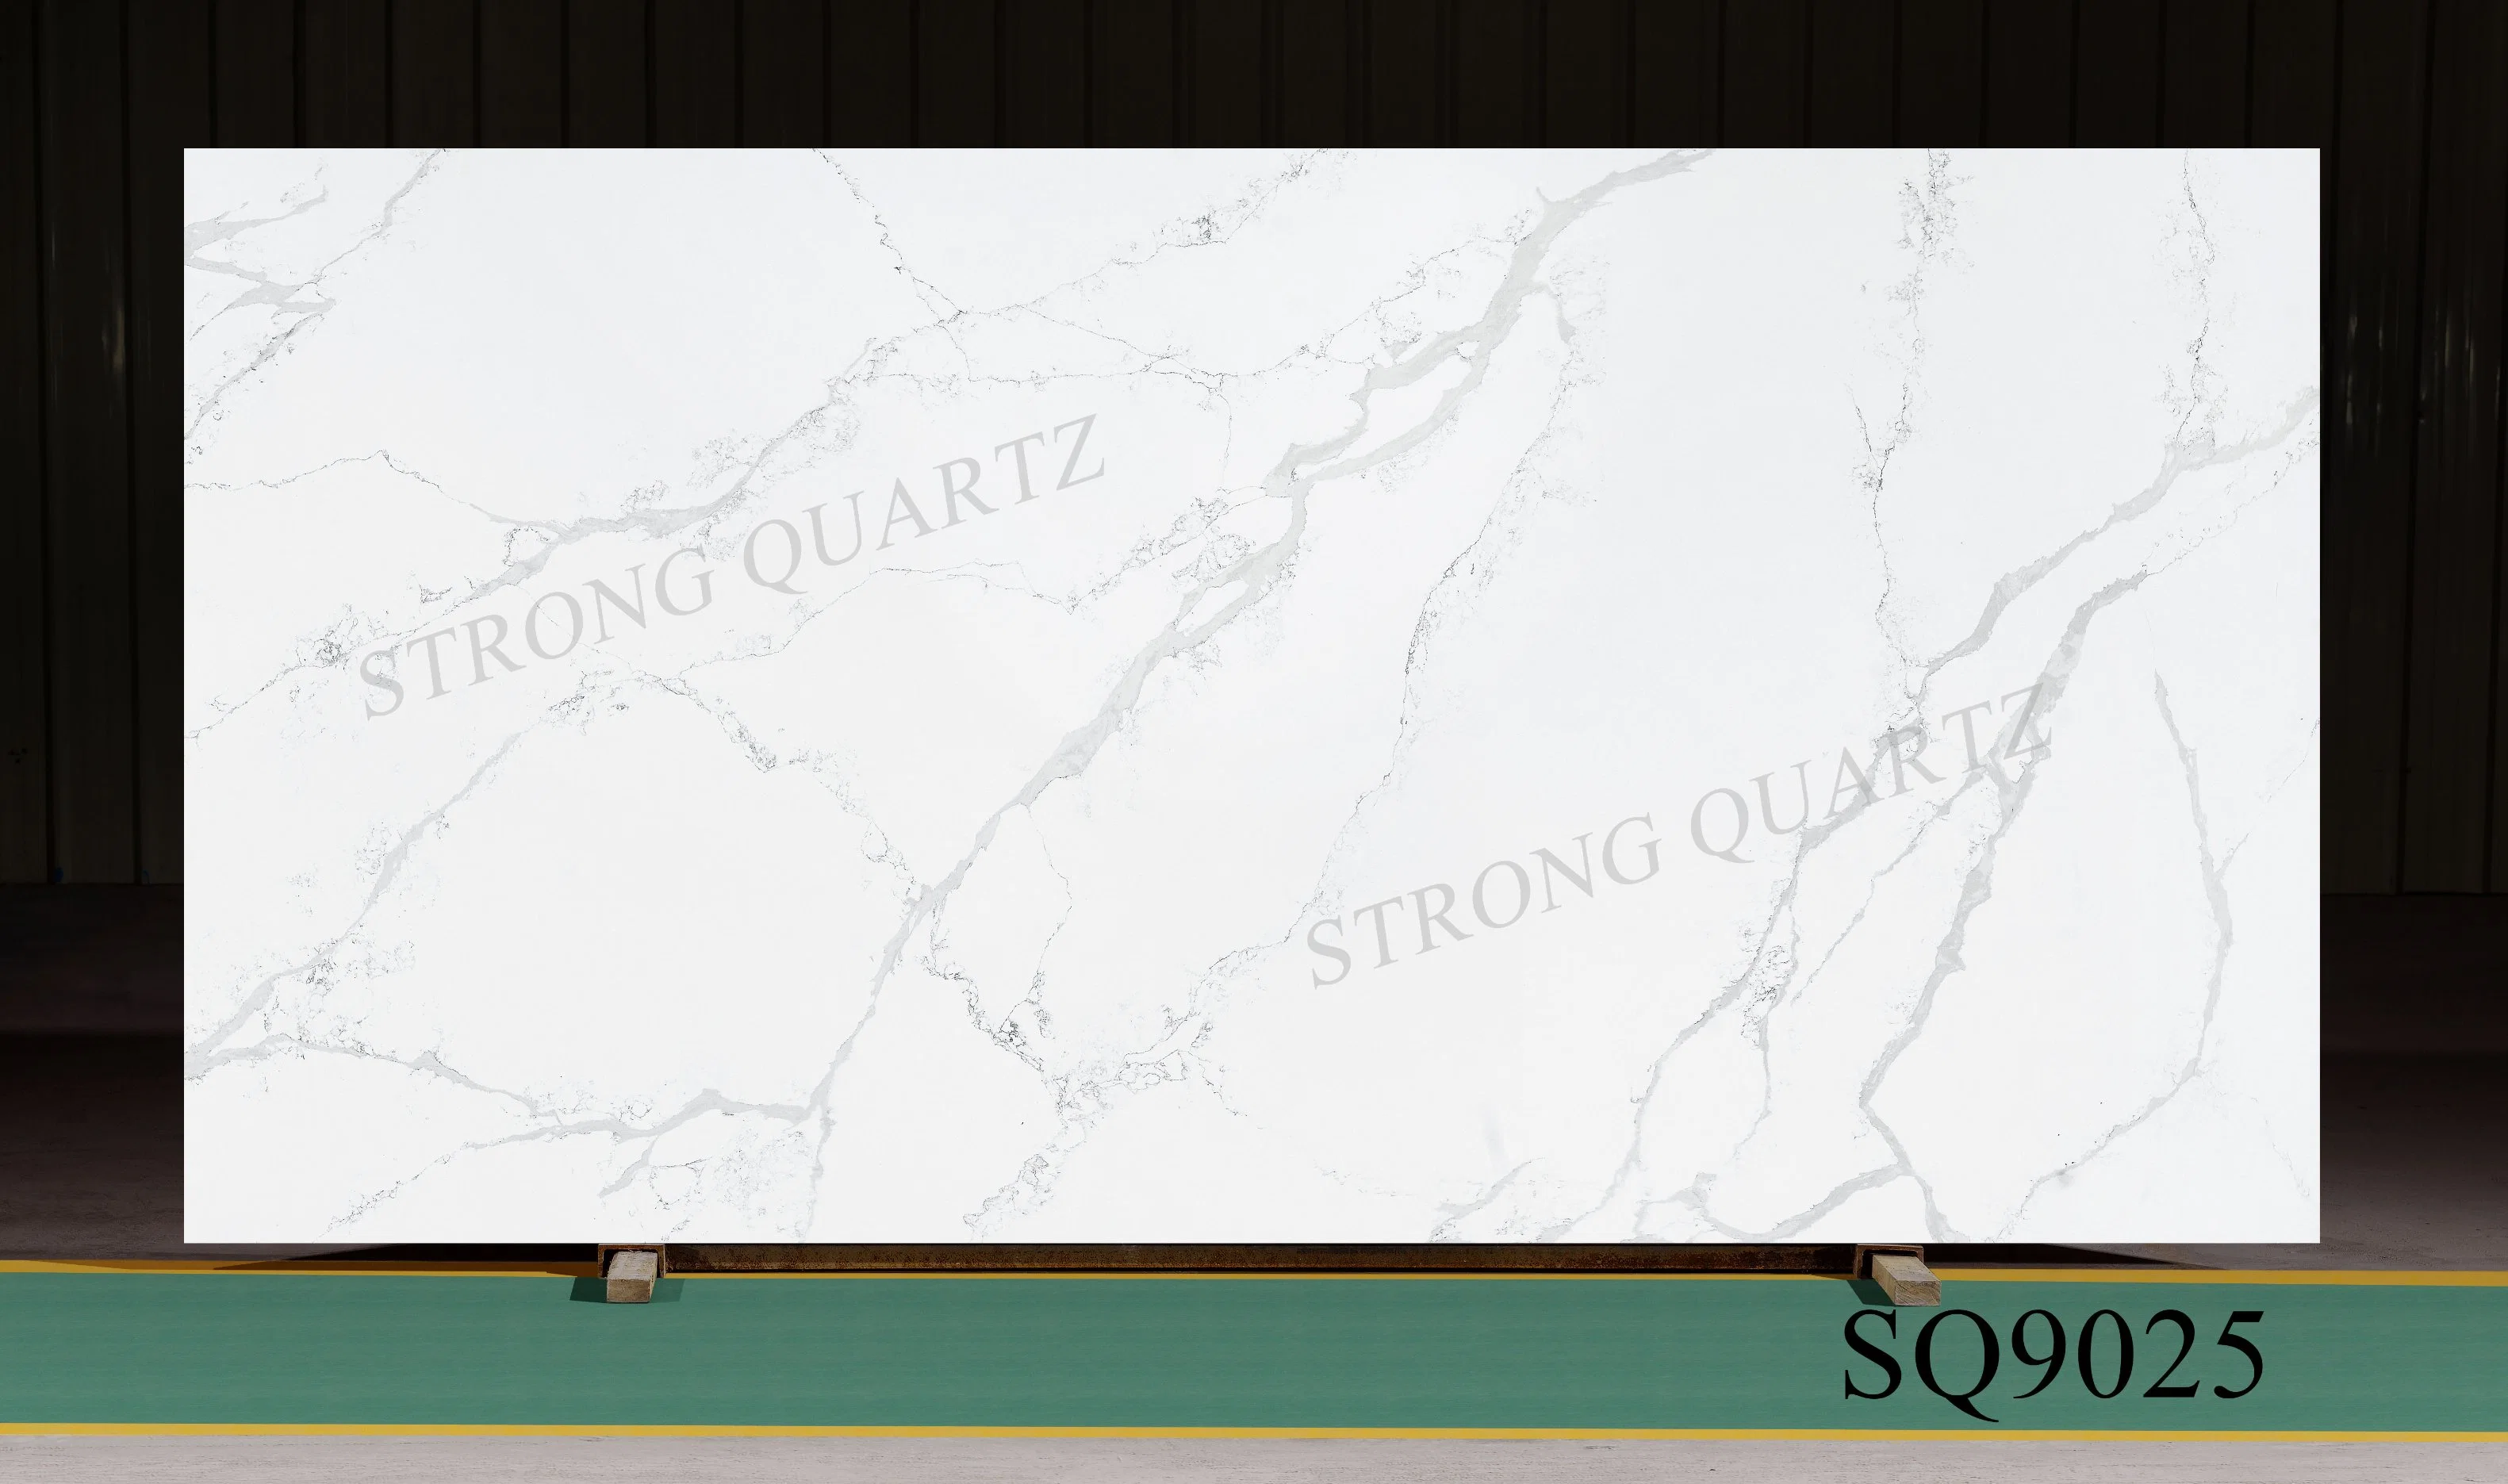 Artificial Quartz Stone Polished for Countertops/Vanity Tops/Hotel Design with Solid Calacatta Finish